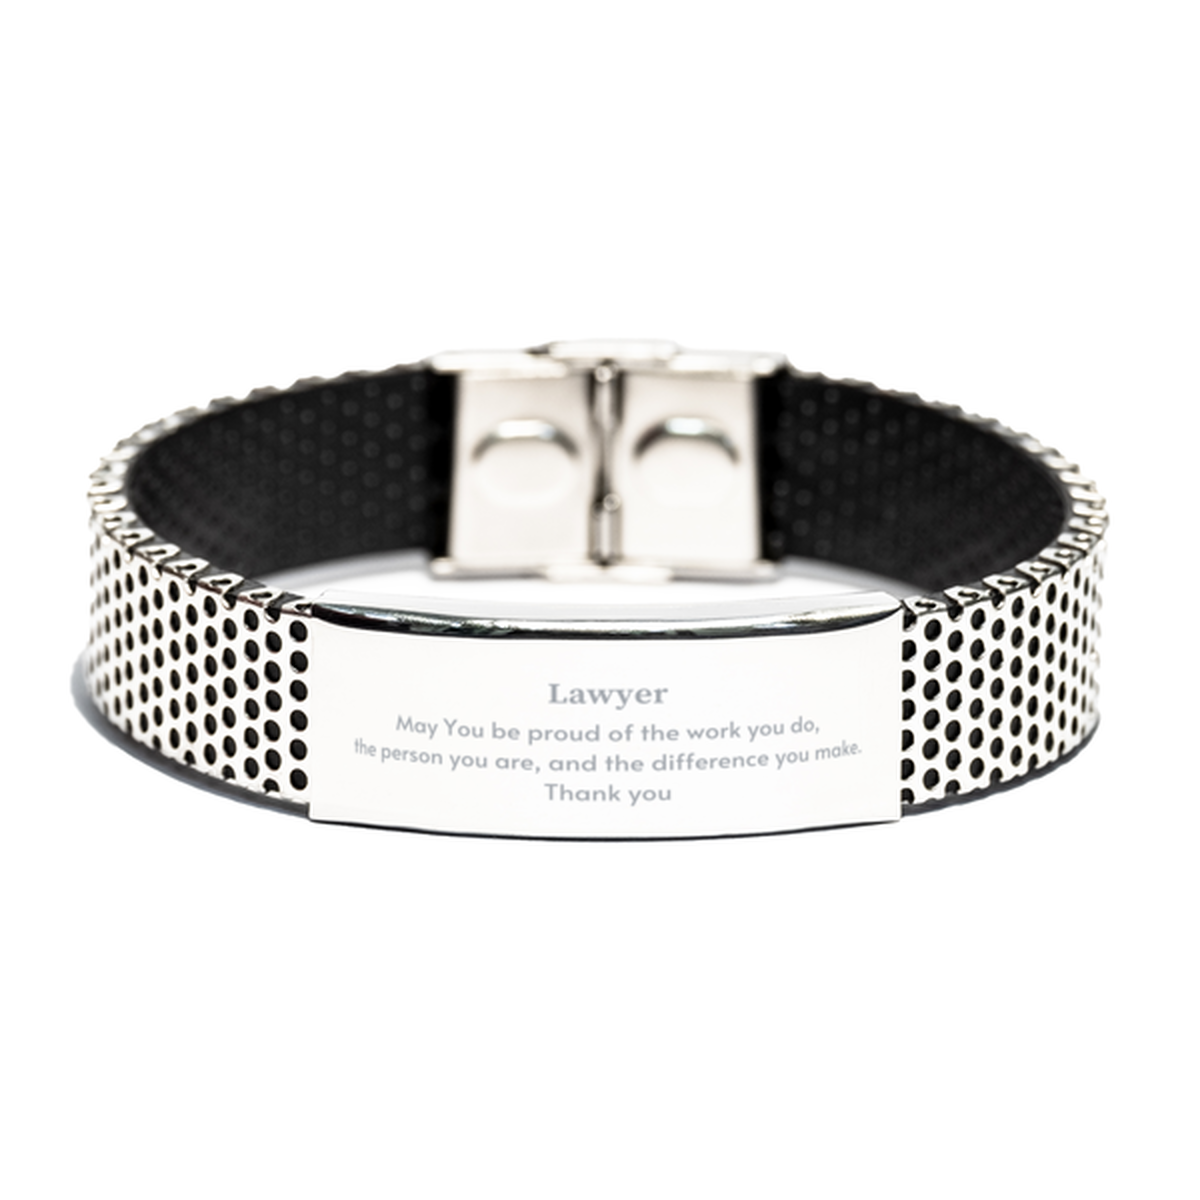 Heartwarming Stainless Steel Bracelet Retirement Coworkers Gifts for Lawyer, Lawyer May You be proud of the work you do, the person you are Gifts for Boss Men Women Friends